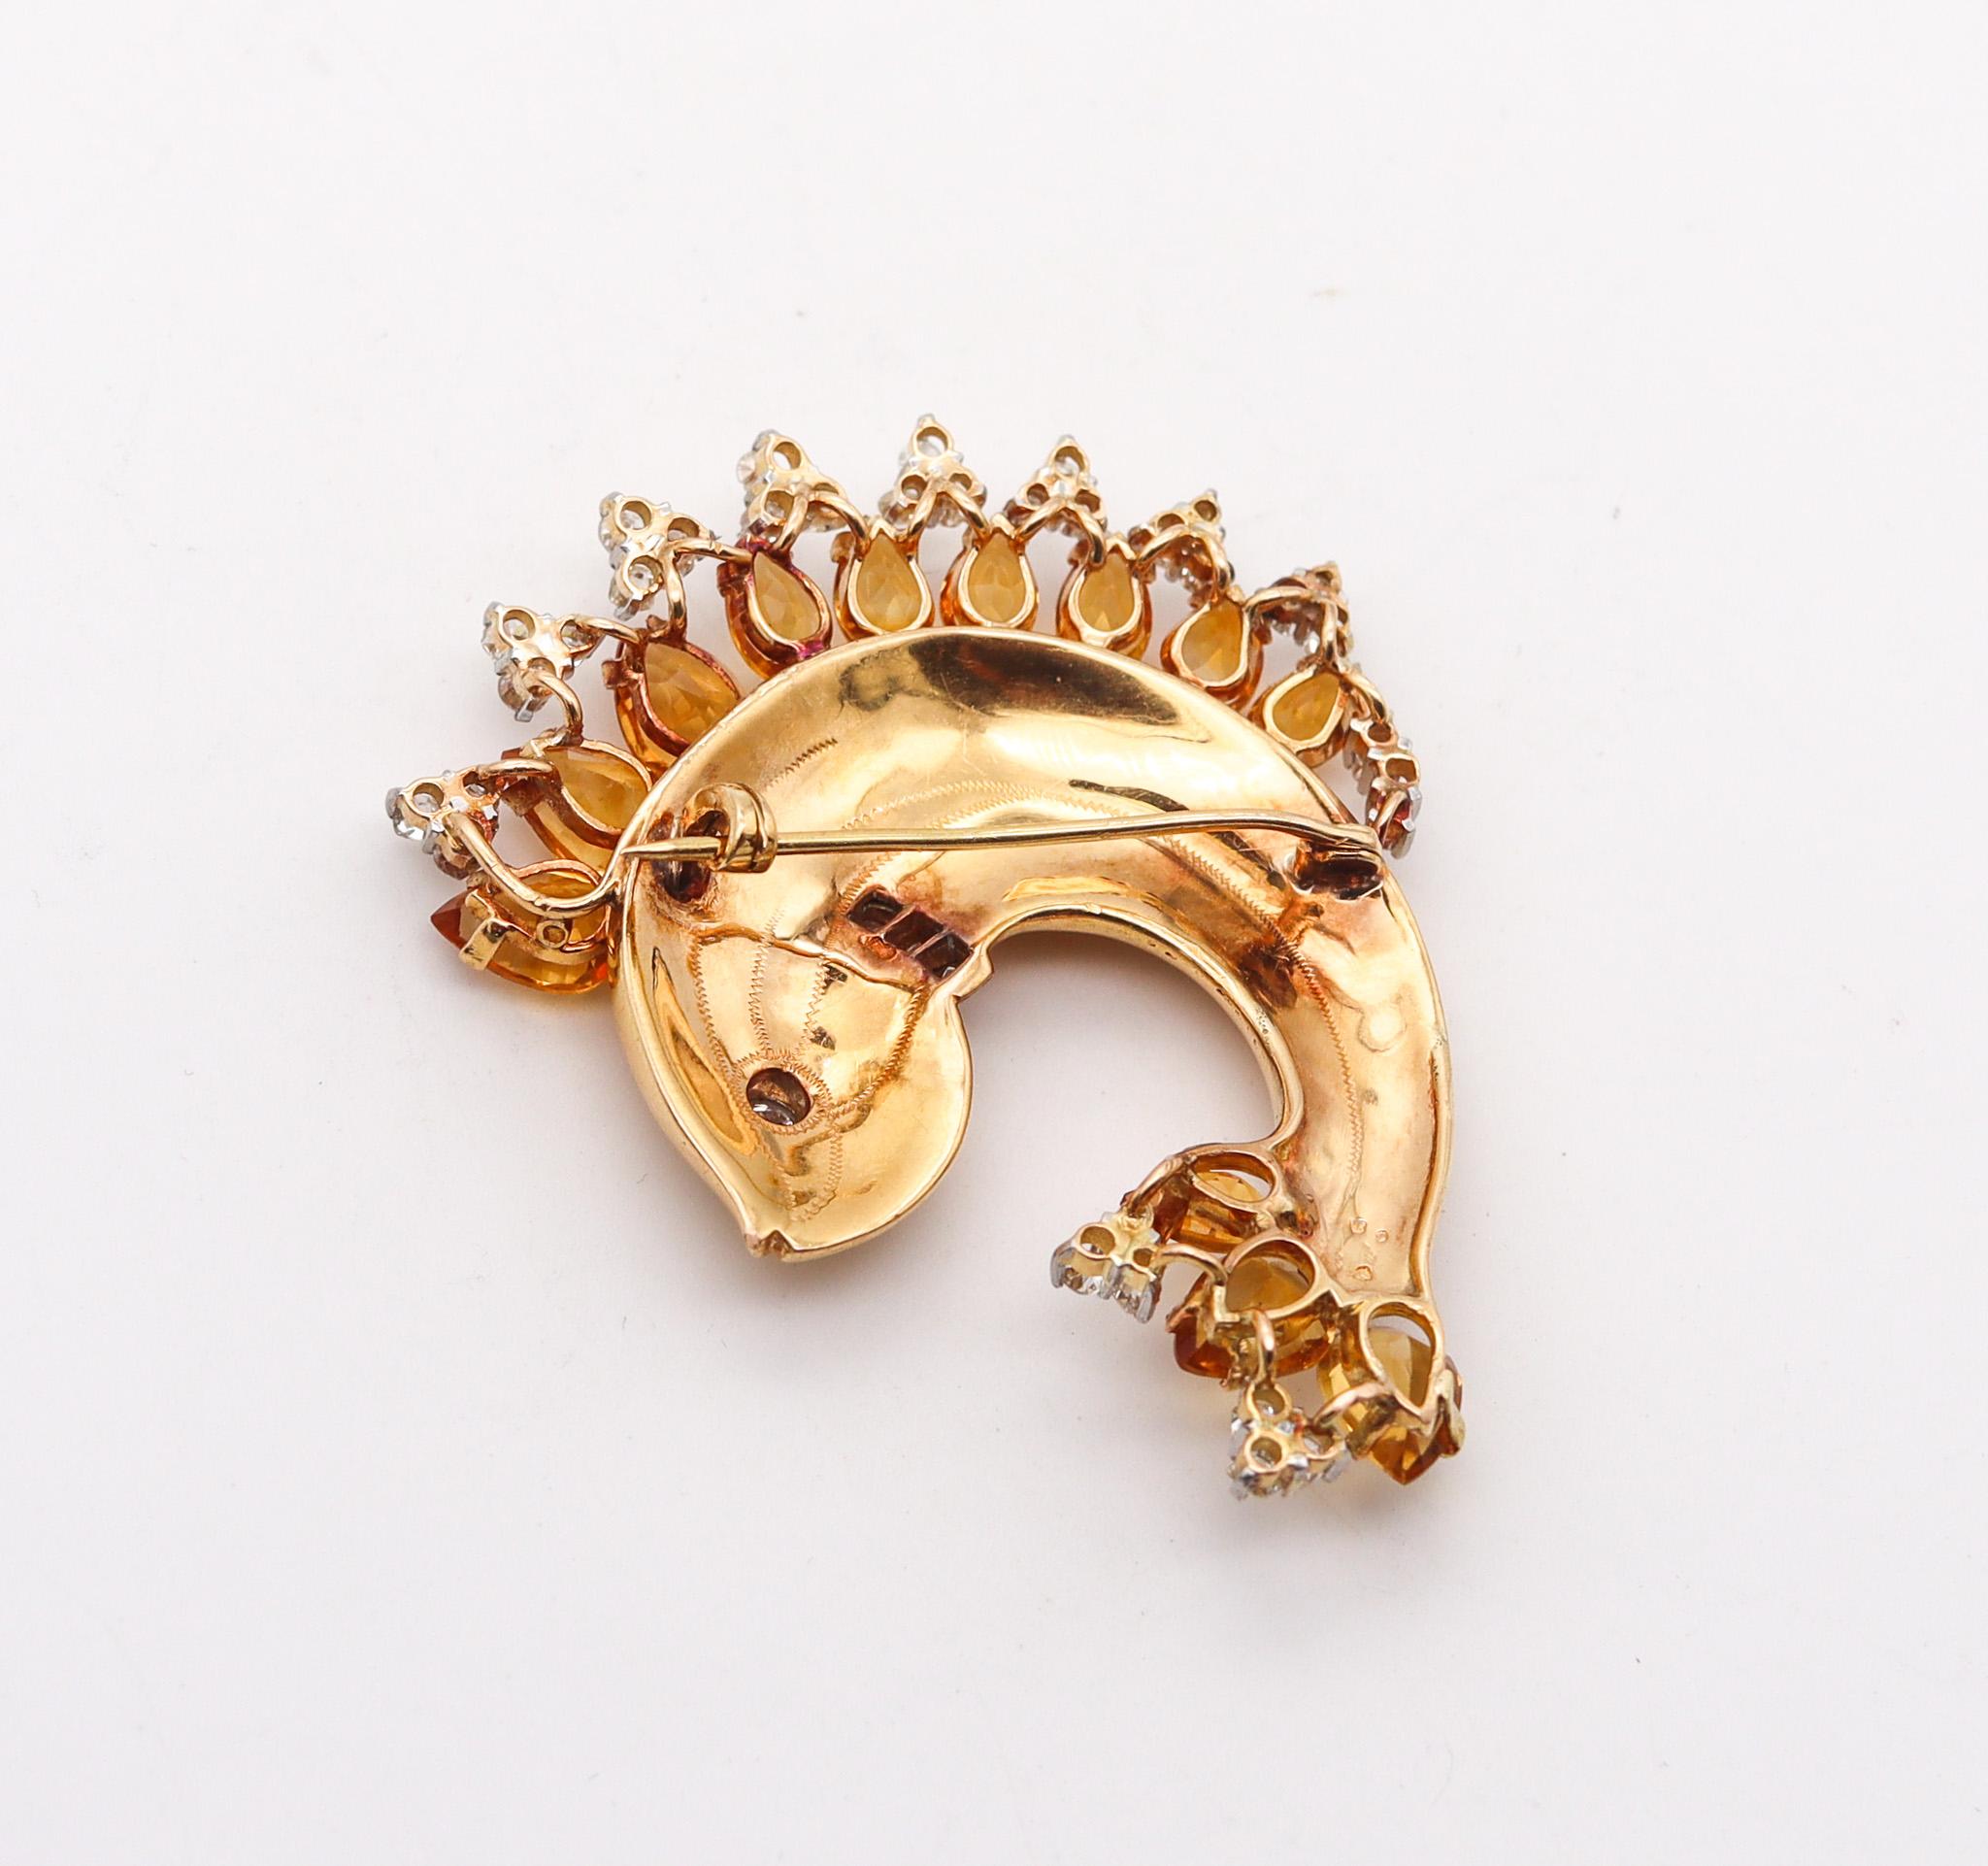 Women's Austria 1930 Art Deco Fish Brooch In 18Kt Gold With 33.28 Ctw Diamonds & Citrine For Sale